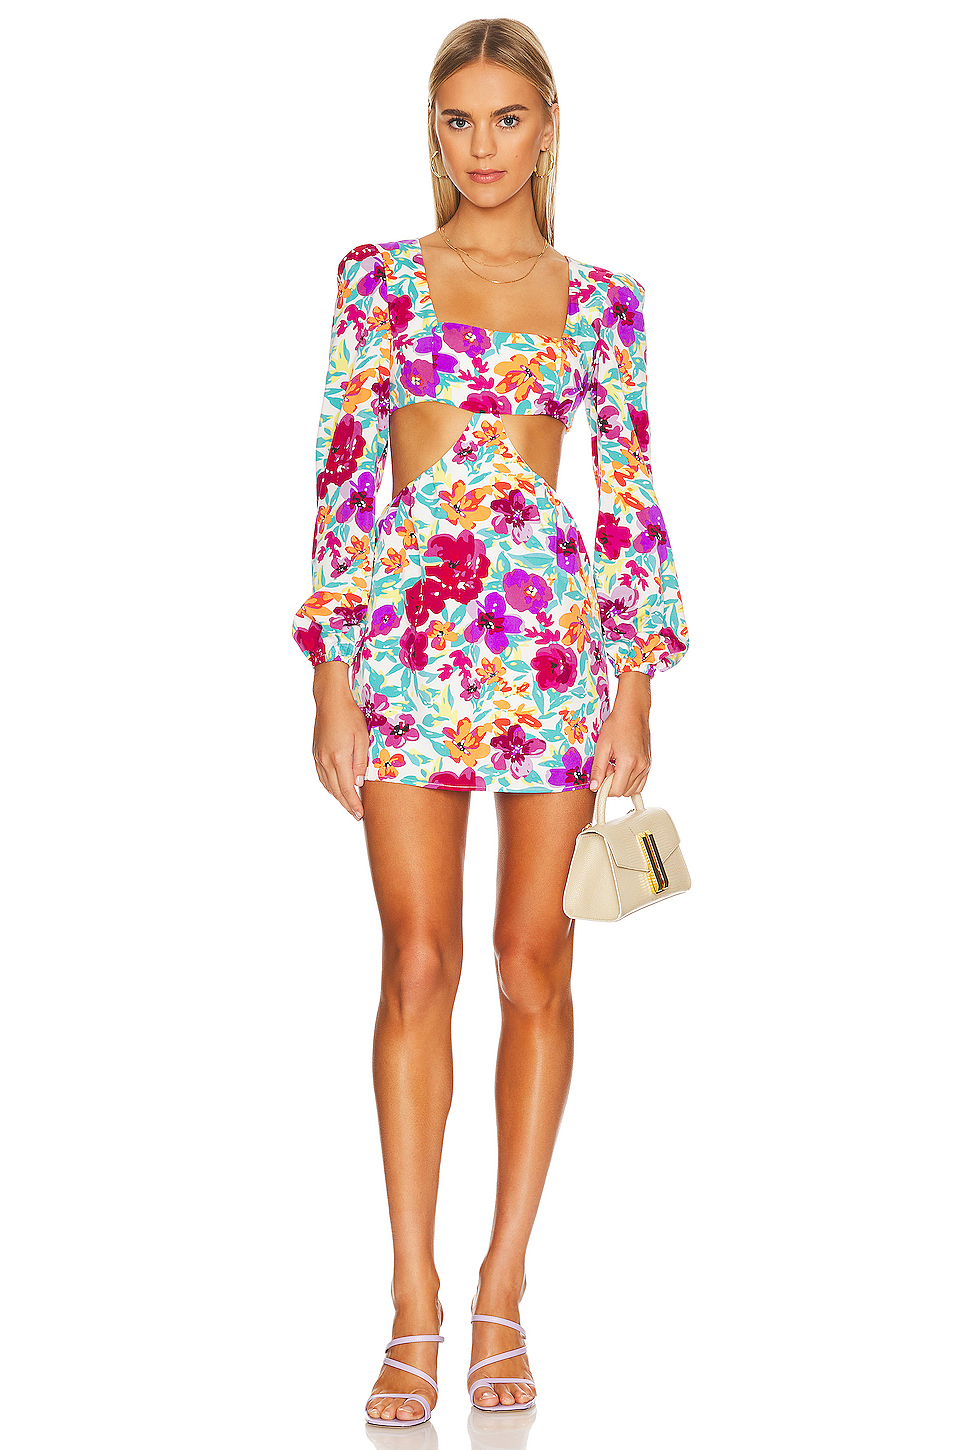 MORE TO COME Sonya Cut Out Dress in Purple Floral | REVOLVE